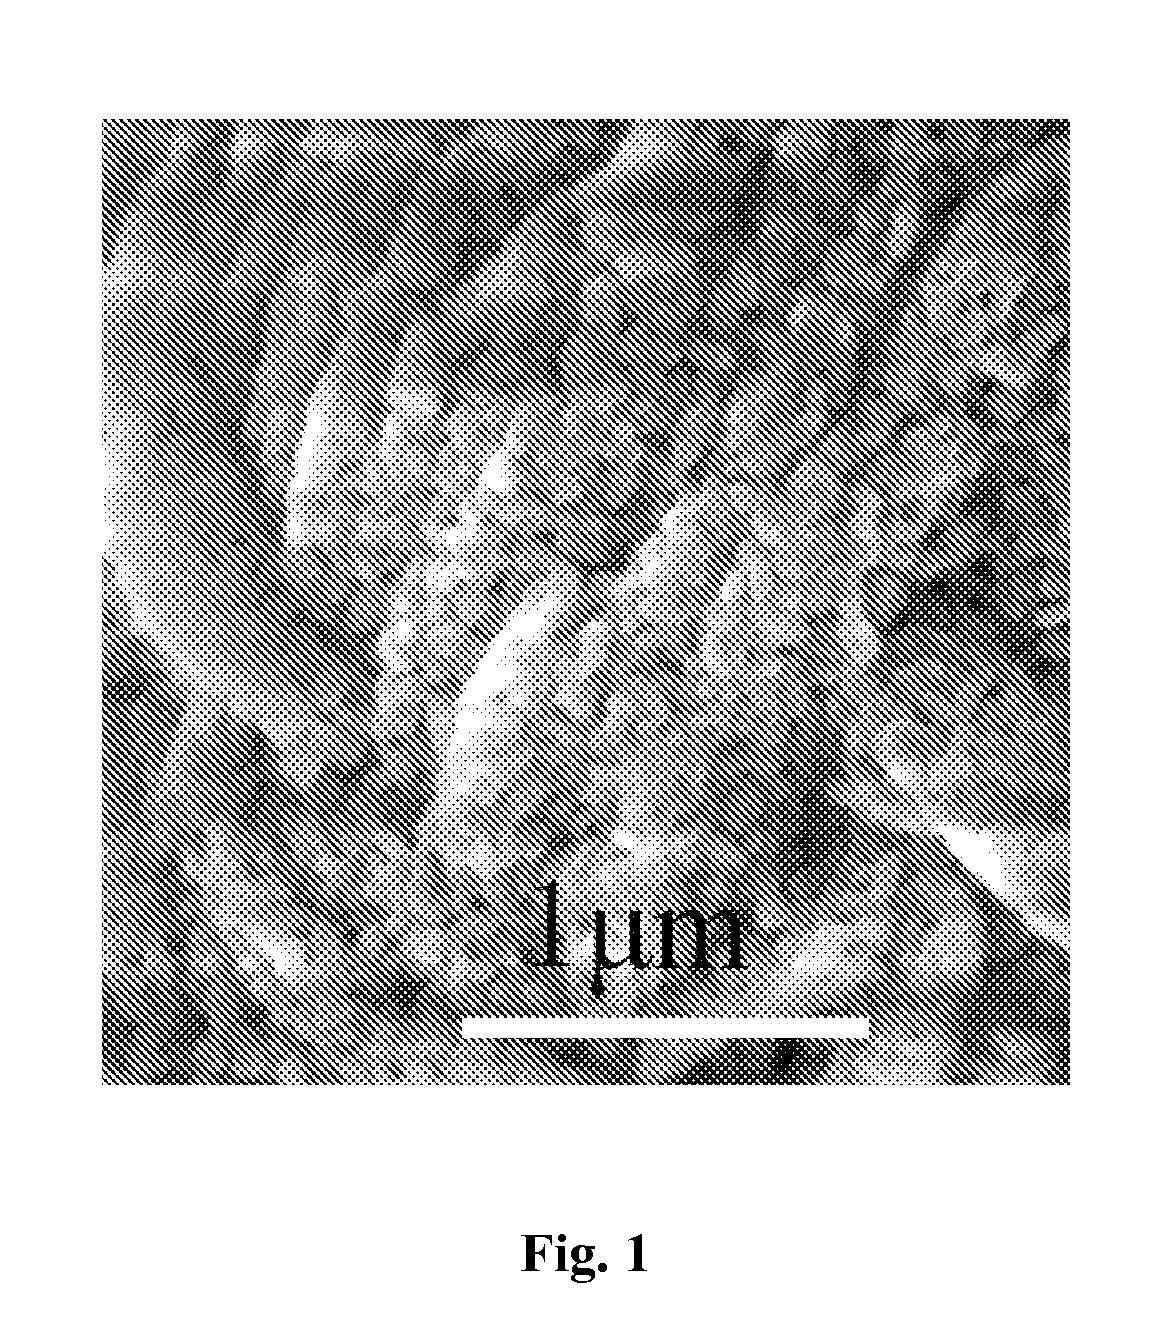 Porous Lithium Mangaense Phosphate-Carbon Composite Material, Preparation Method and Application Thereof